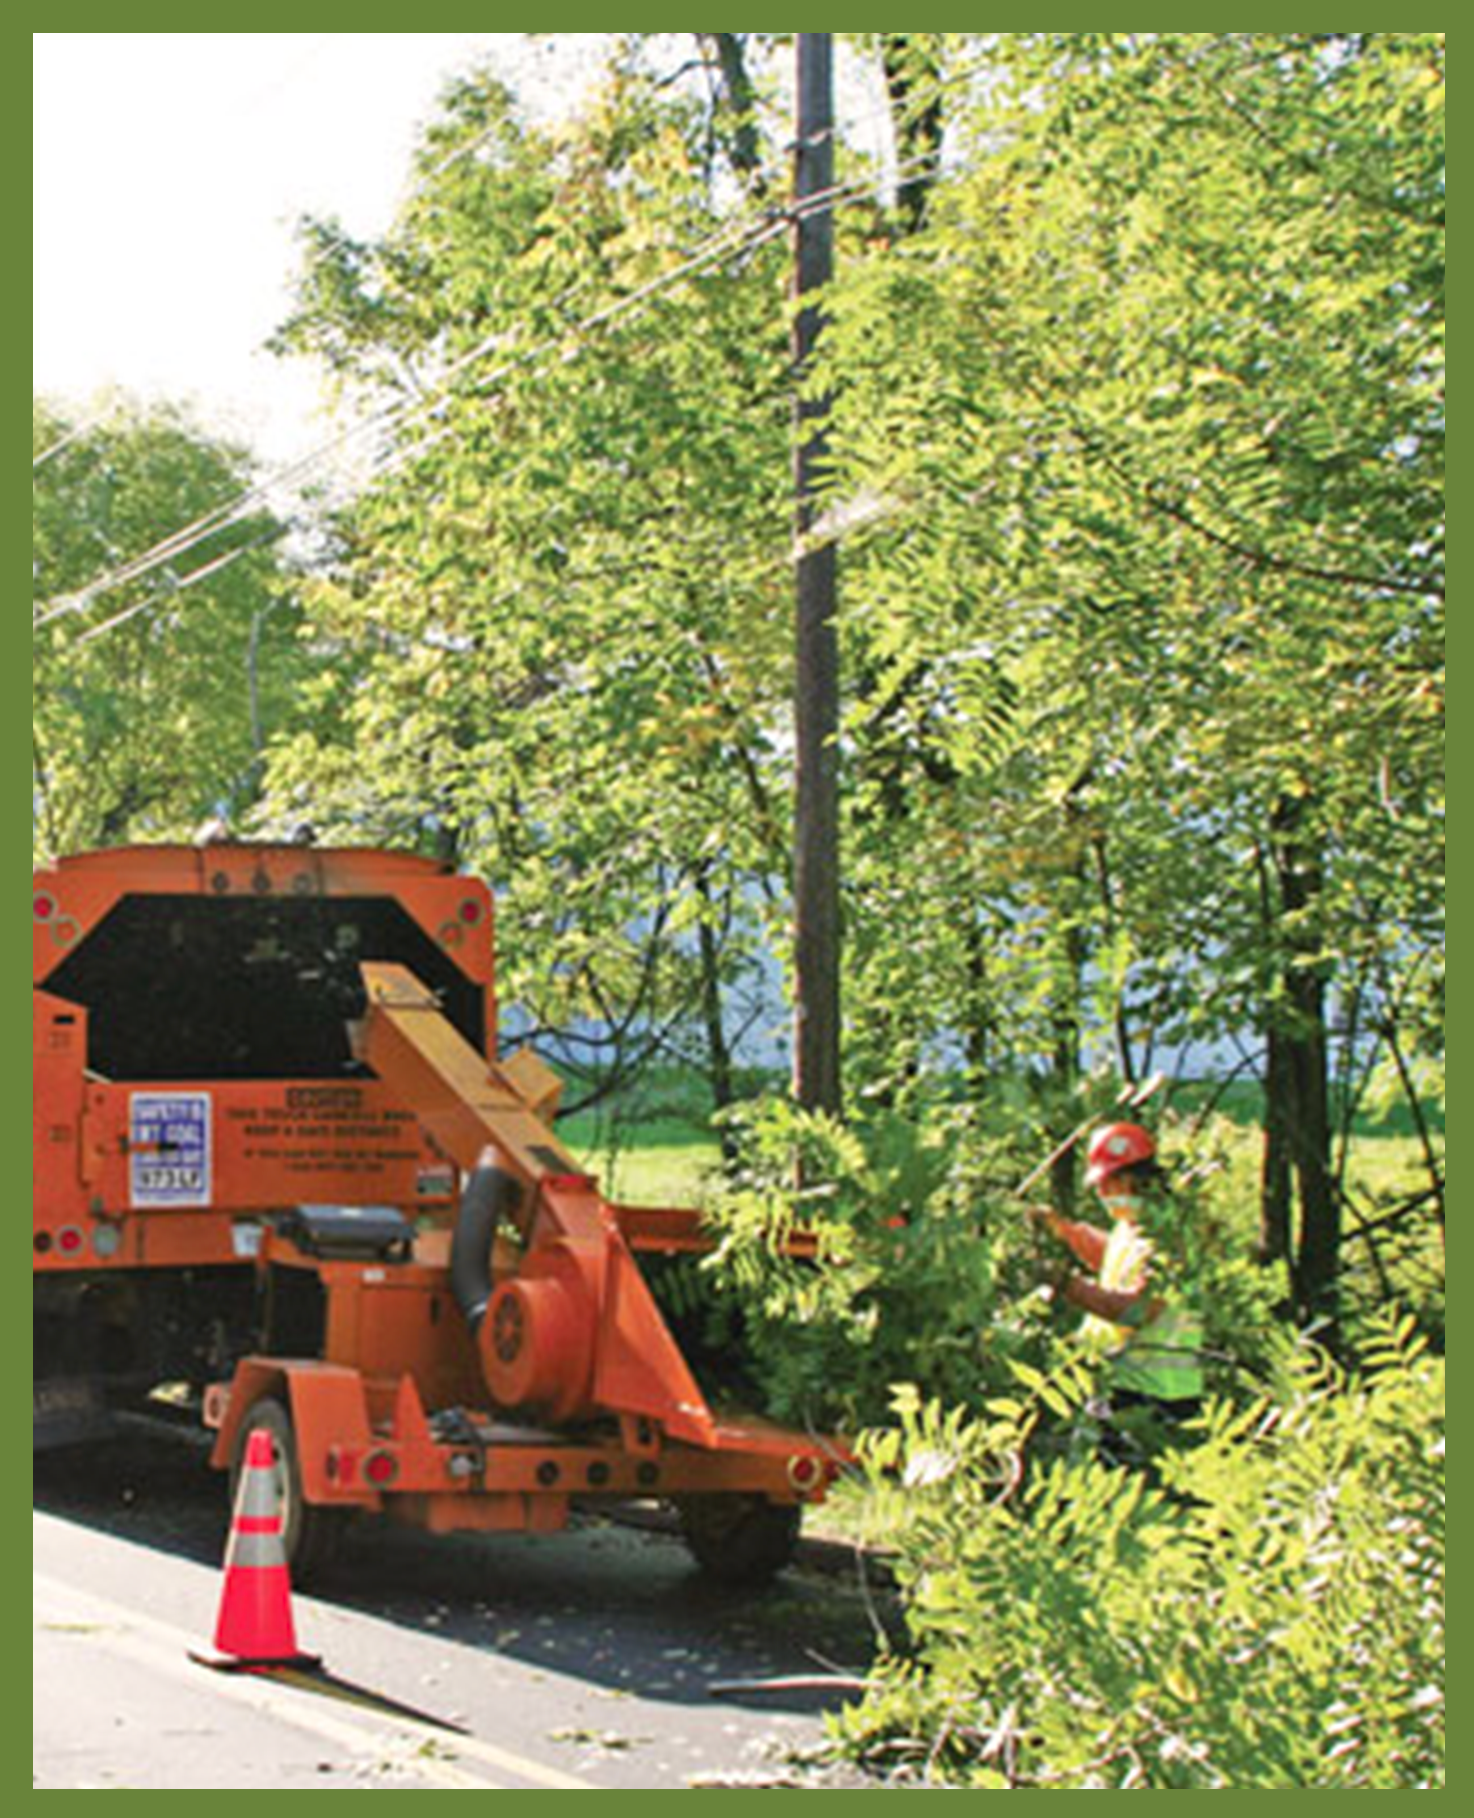 Pictured: An employee of Asplundh Tree Experts (one of the contractors that Sussex REC employs for tree trimming in its service territory) loads cut branches into a woodchipper.